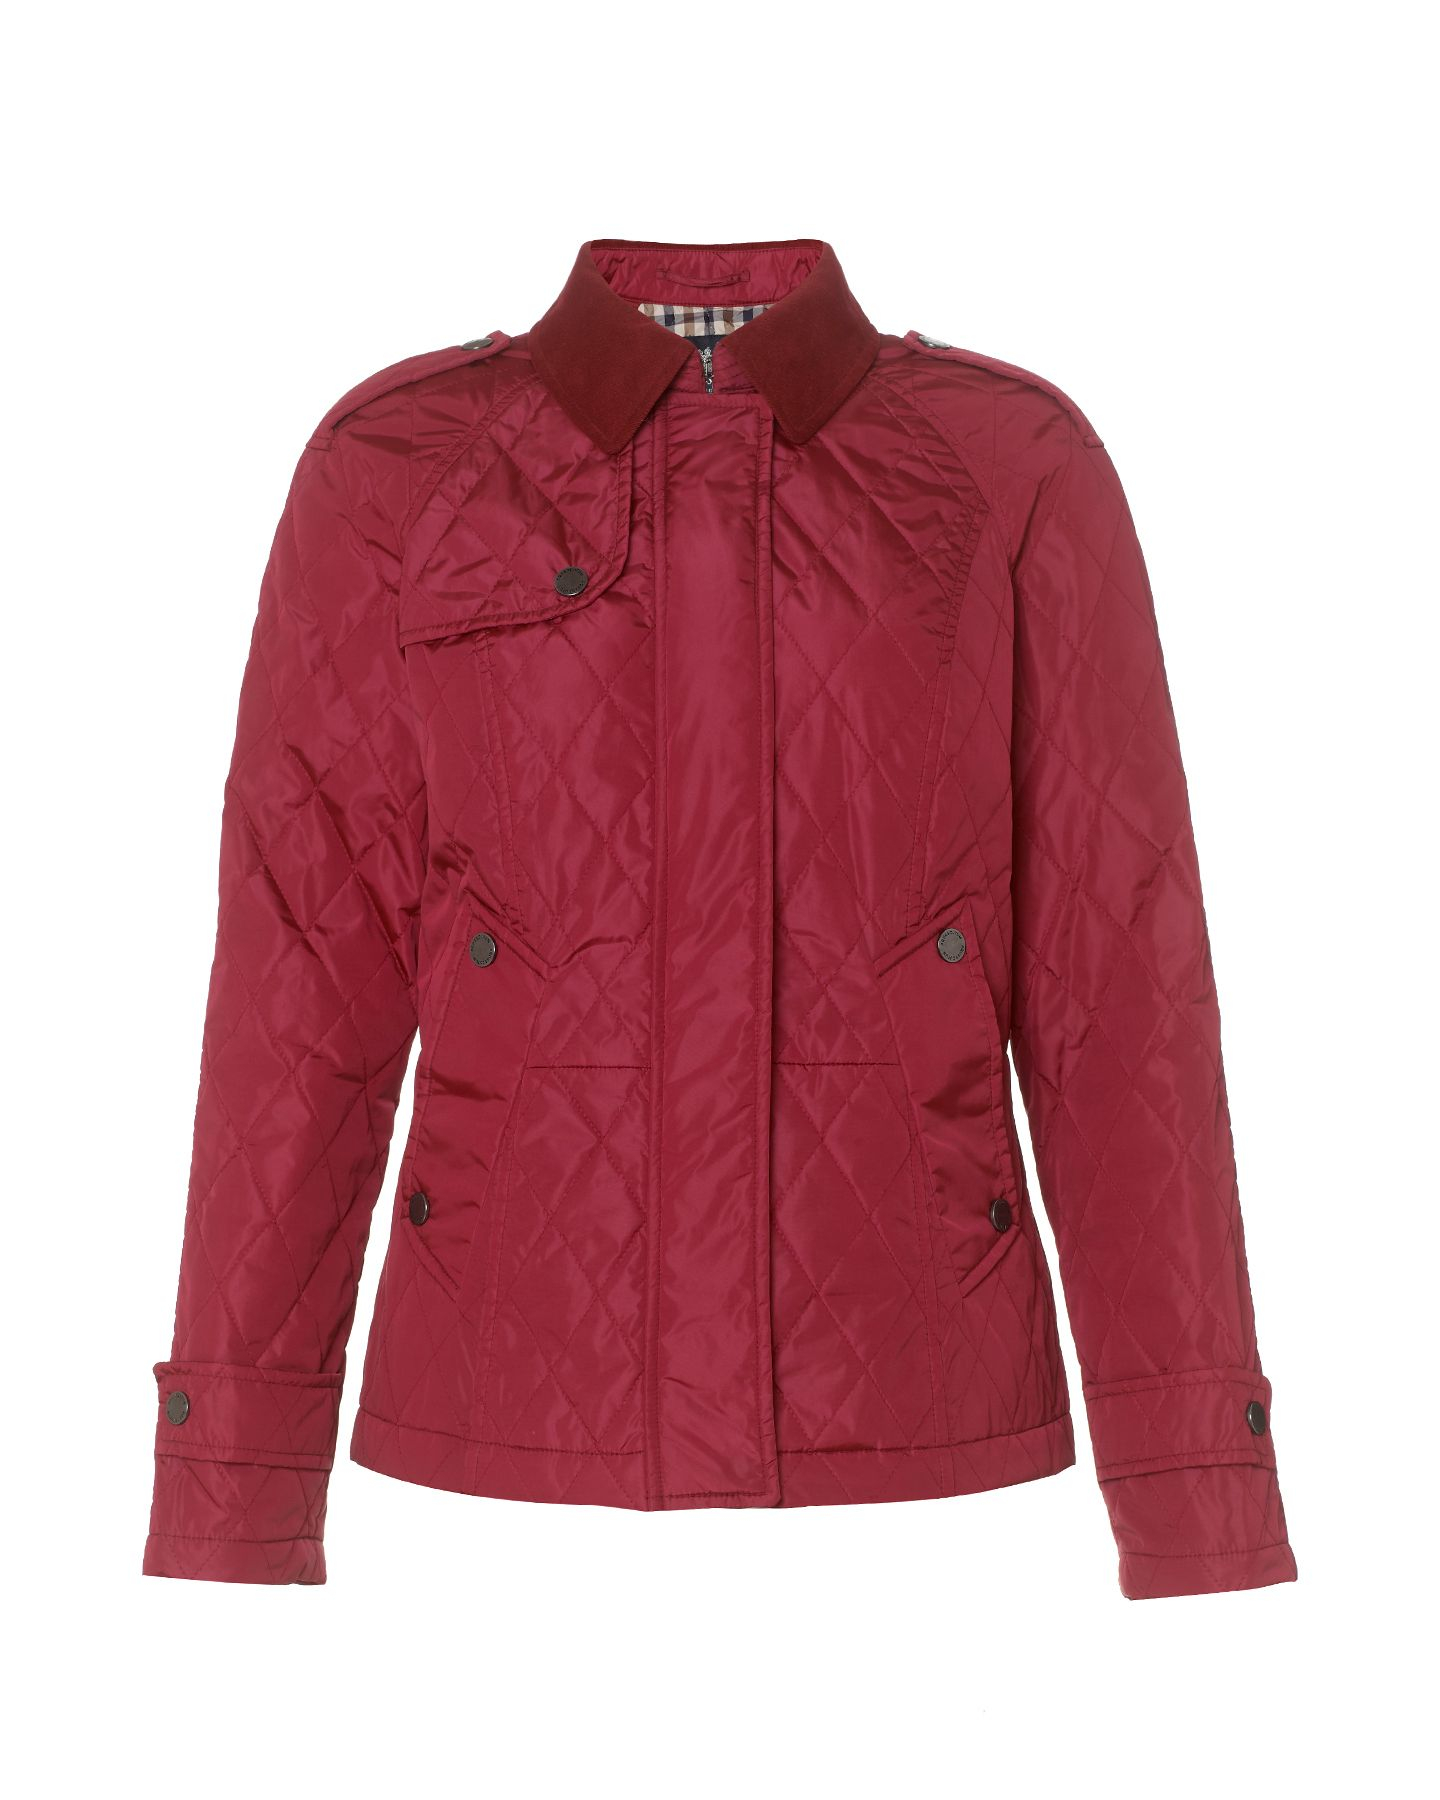 Aquascutum Corduroy Collar Quilted Jacket in Red (Burgundy) | Lyst